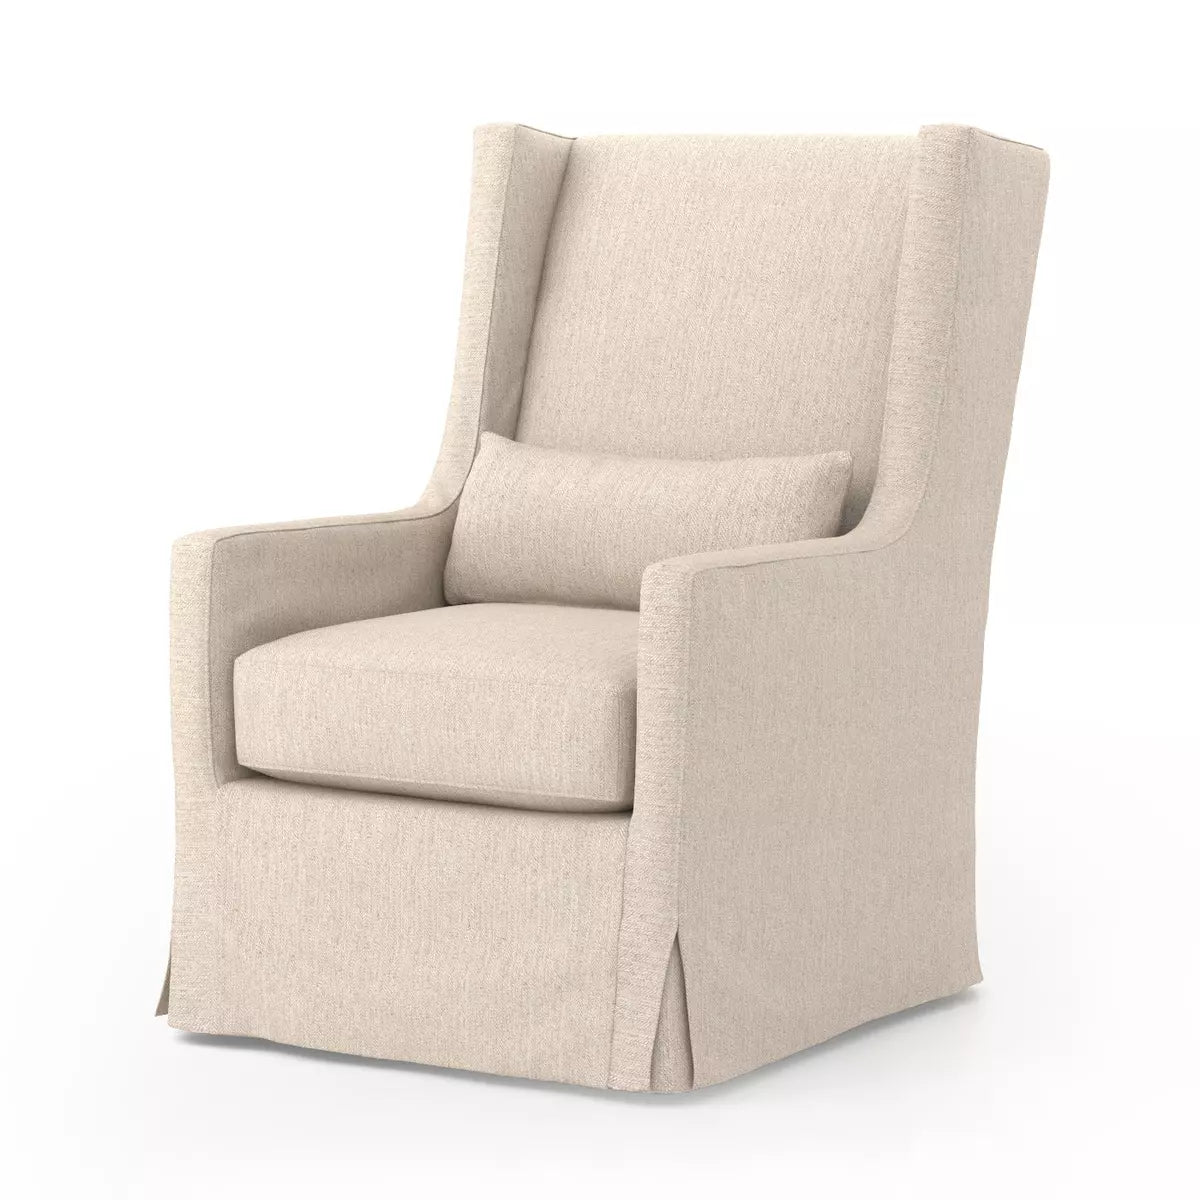 The Swivel Wing Chair